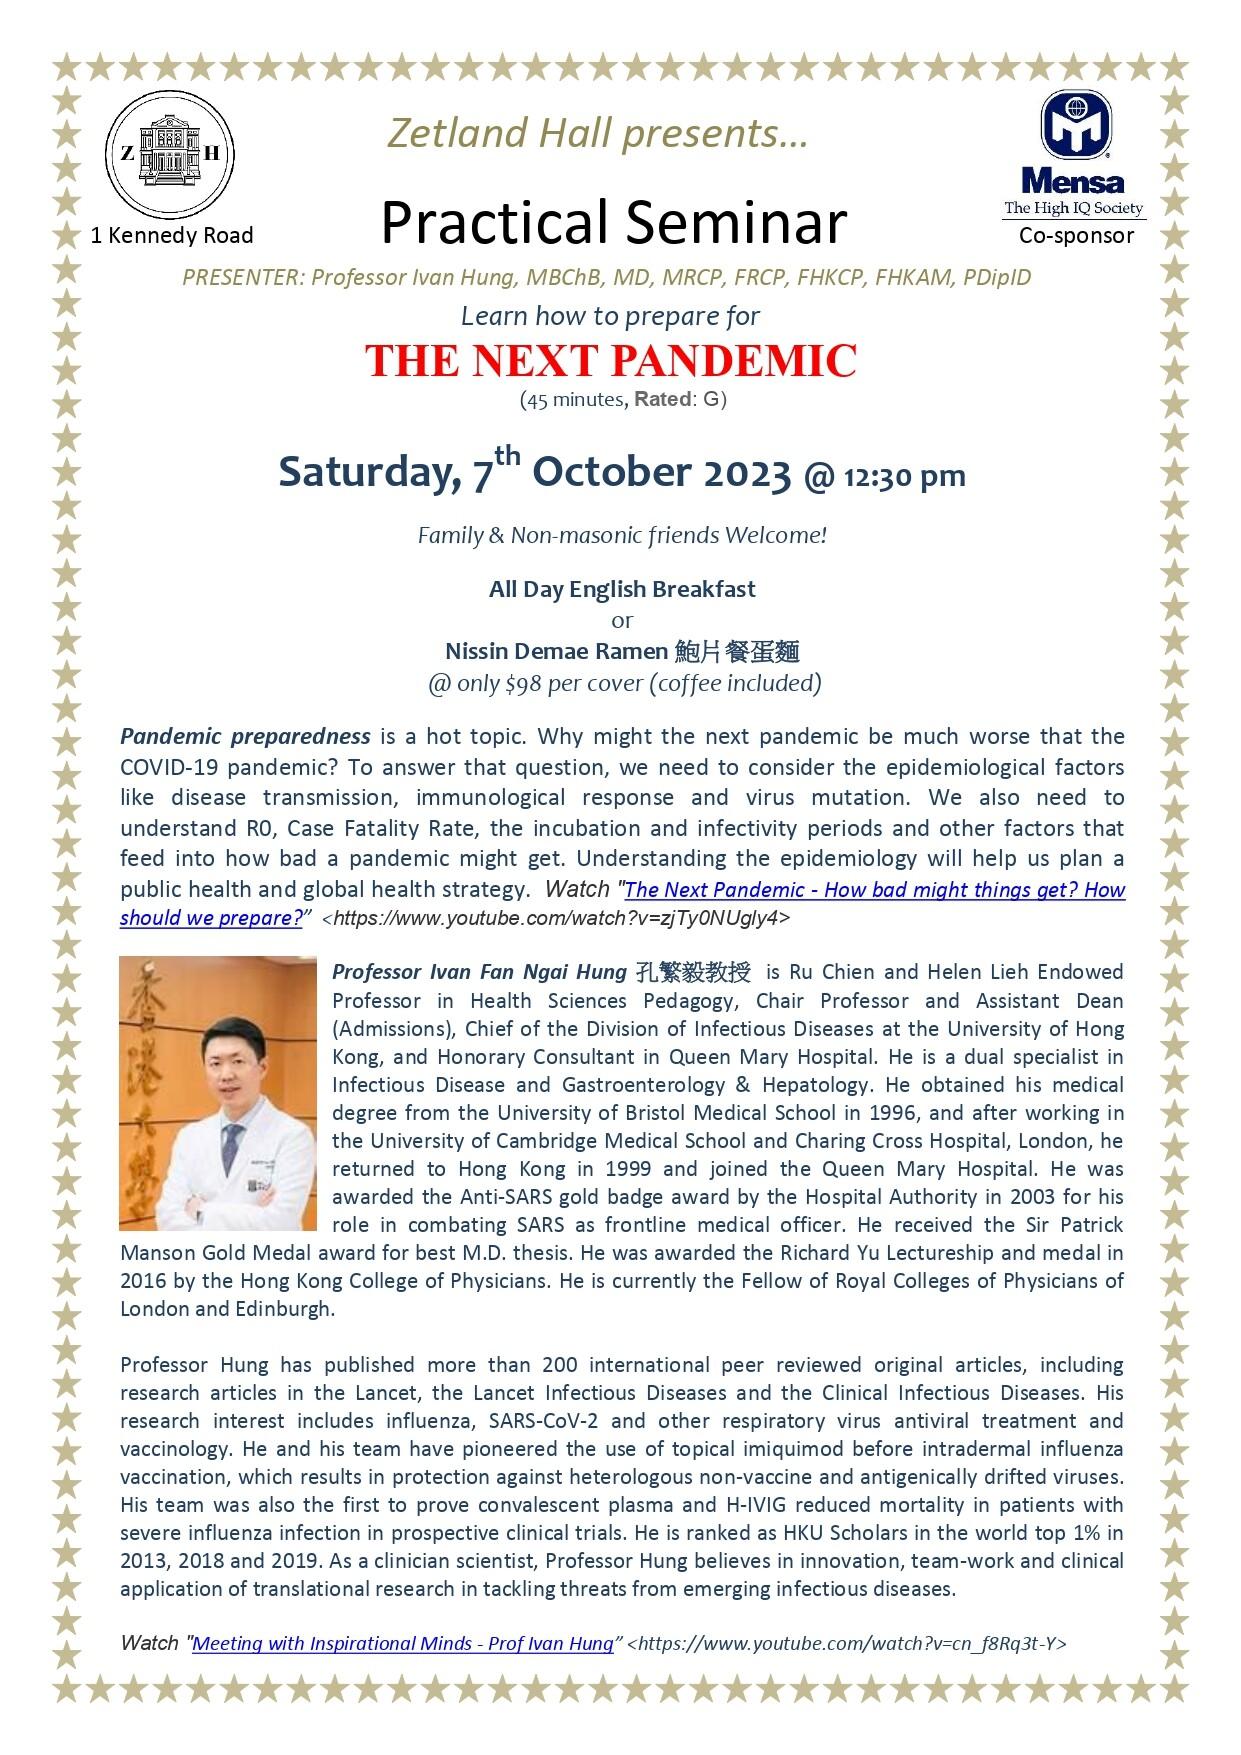 Practical Seminar: How to Prepare for the Next Pandemic